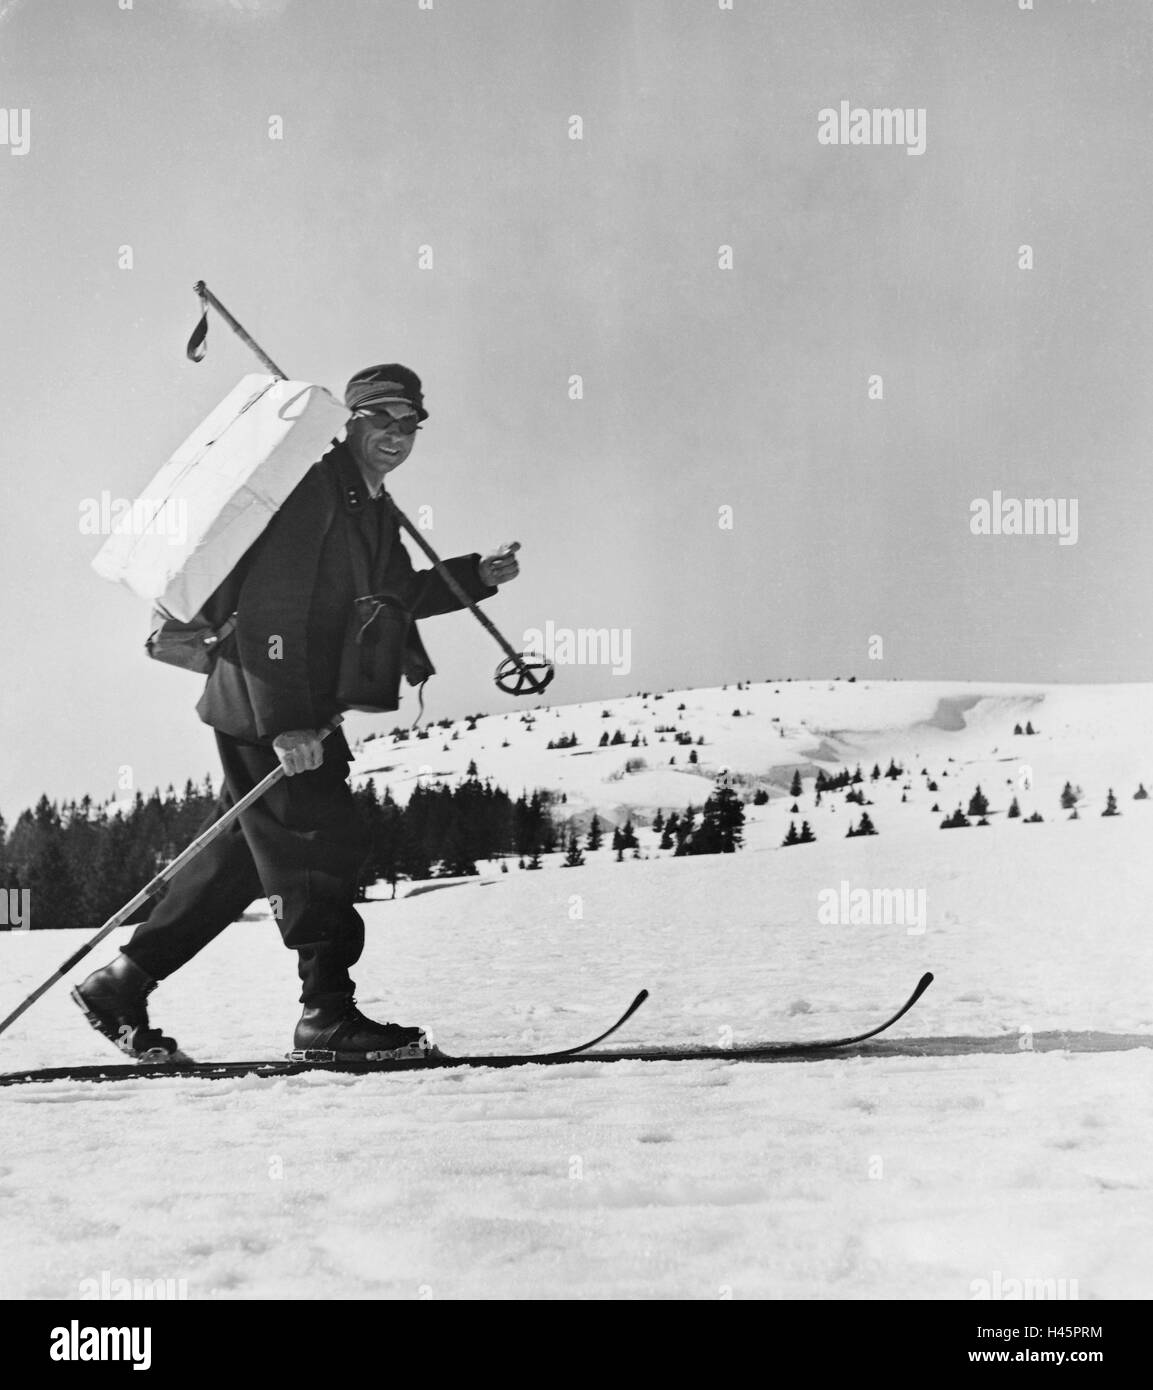 Germany, postman, skis, packet, merry, winter landscape, human, man, postman, go, carry, positive, ski equipment, post office, postal service, delivery, delivery, package delivery, parcel delivery, Skiing, Cross-country skiing, historical, nostalgia, seas Stock Photo